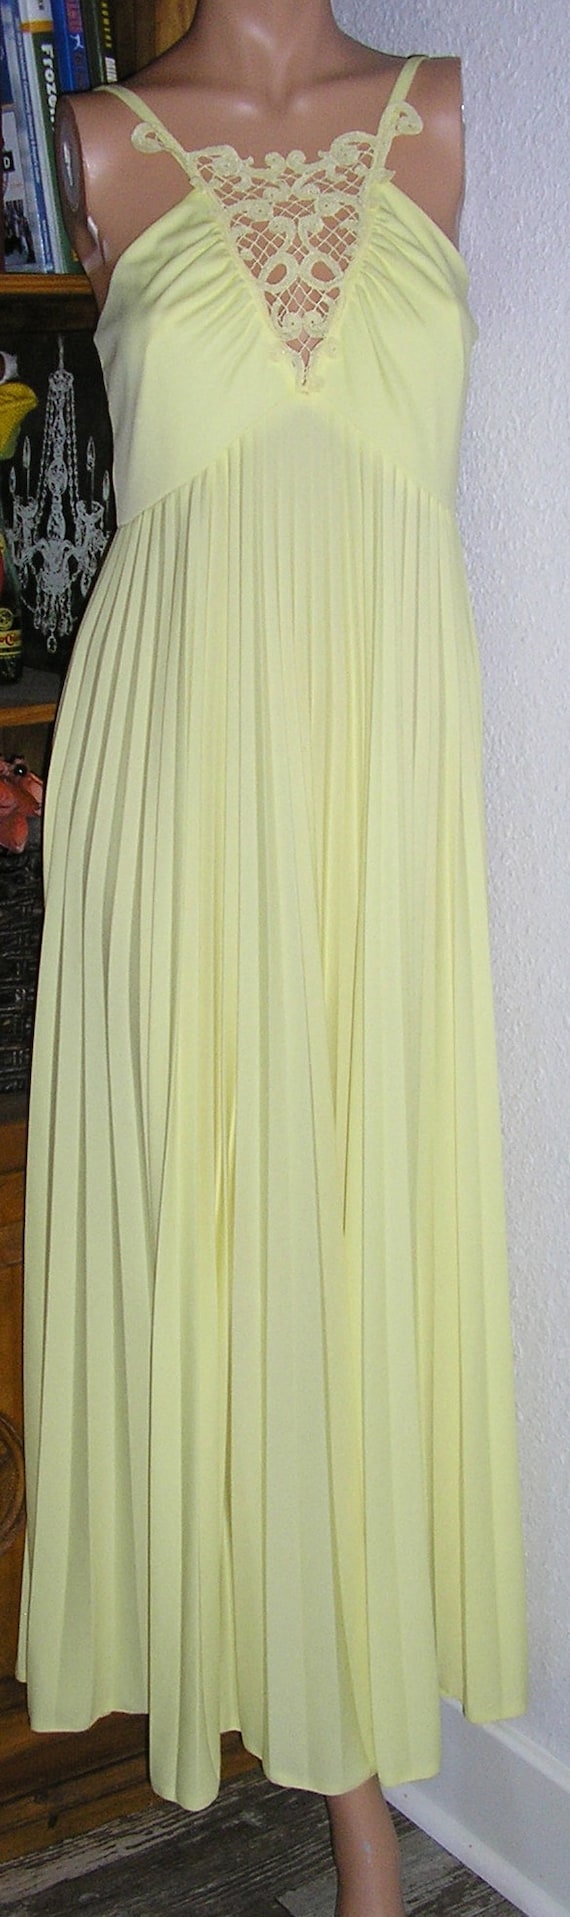 SALE  Vintage 70s, yellow pleated maxi dress, gown